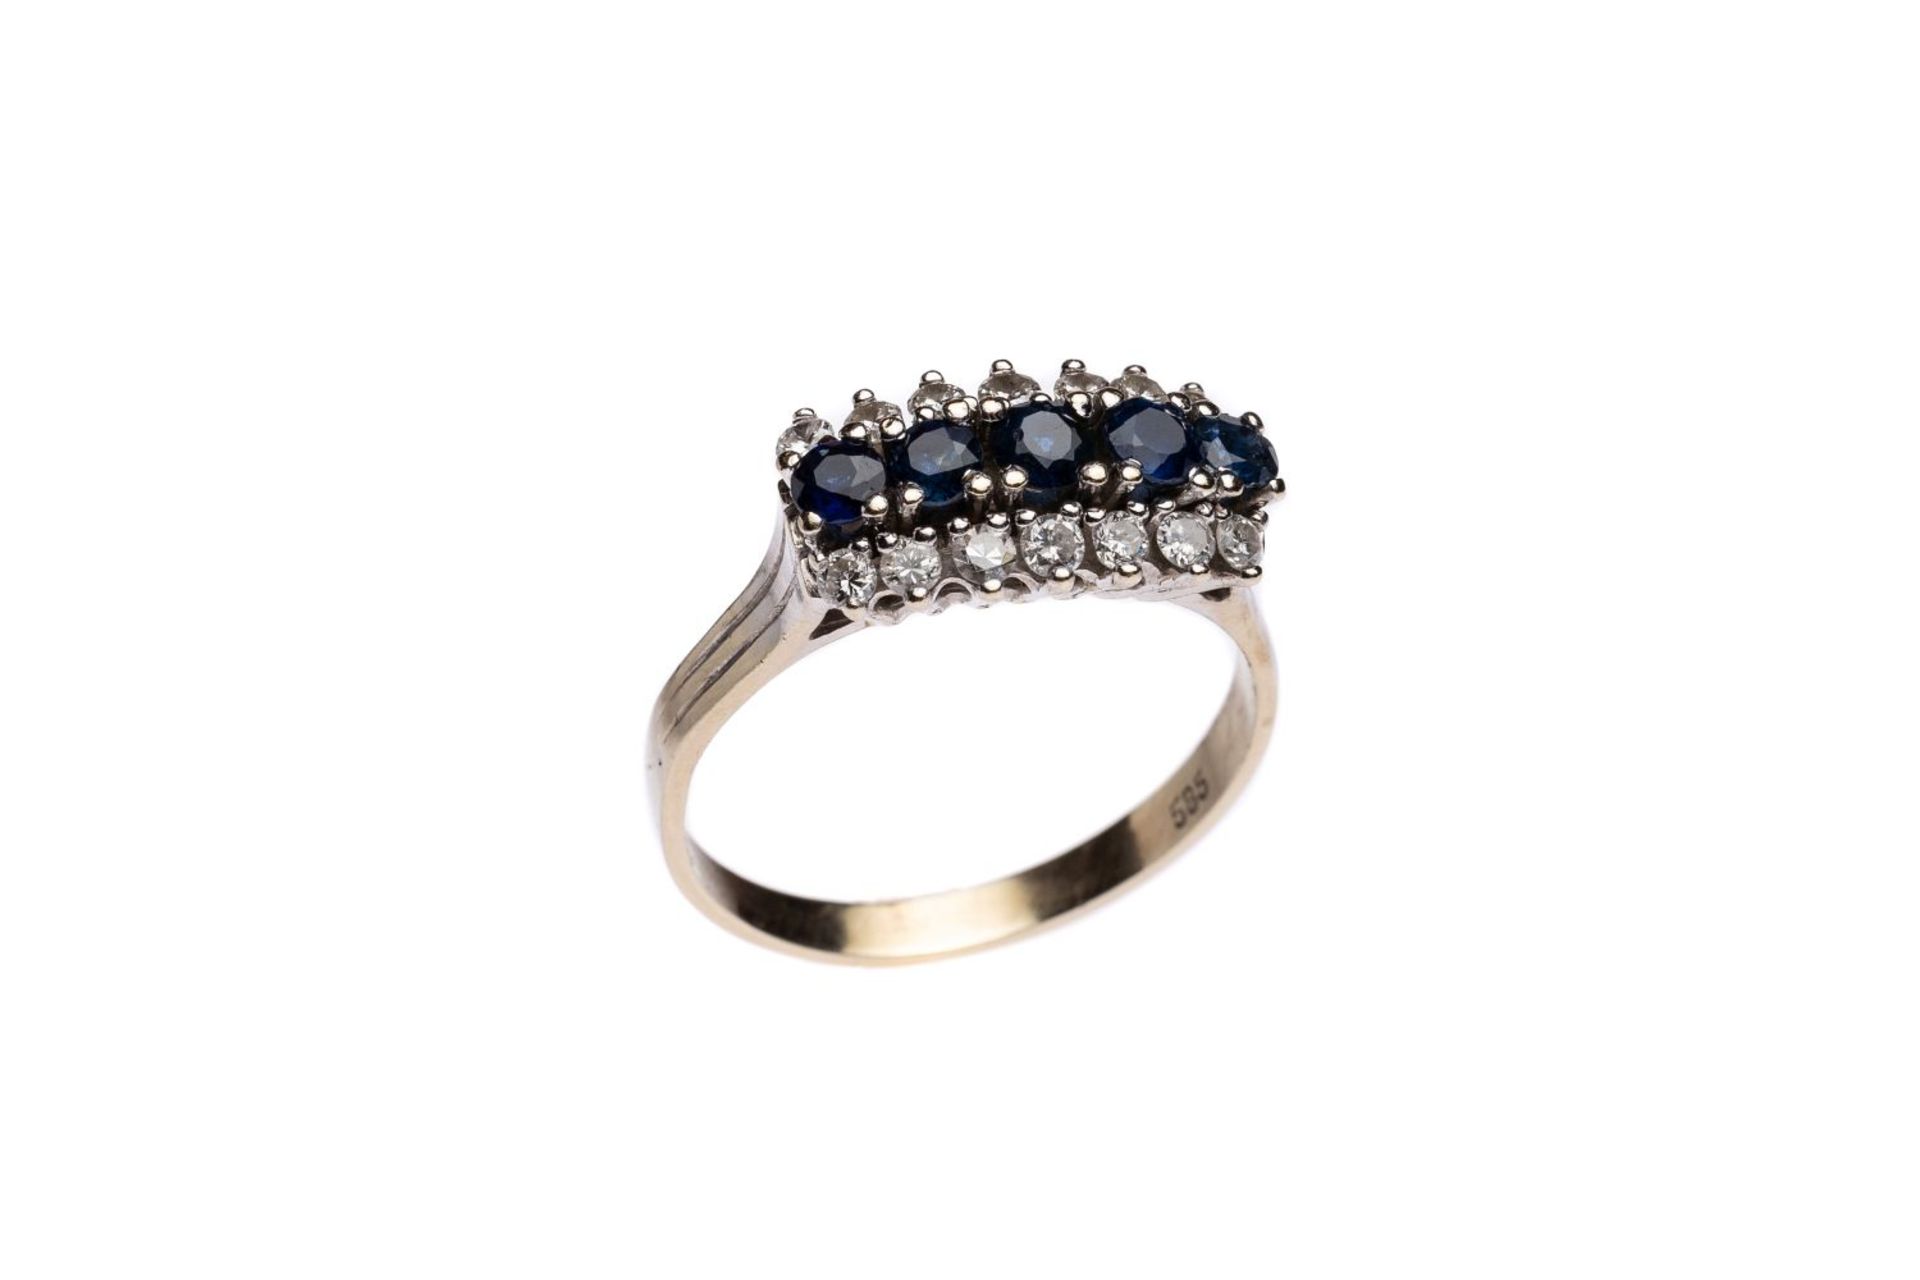 Diamond ring14k white gold ring with brilliants total carat weight approx. 0.21 ct, and sapphires